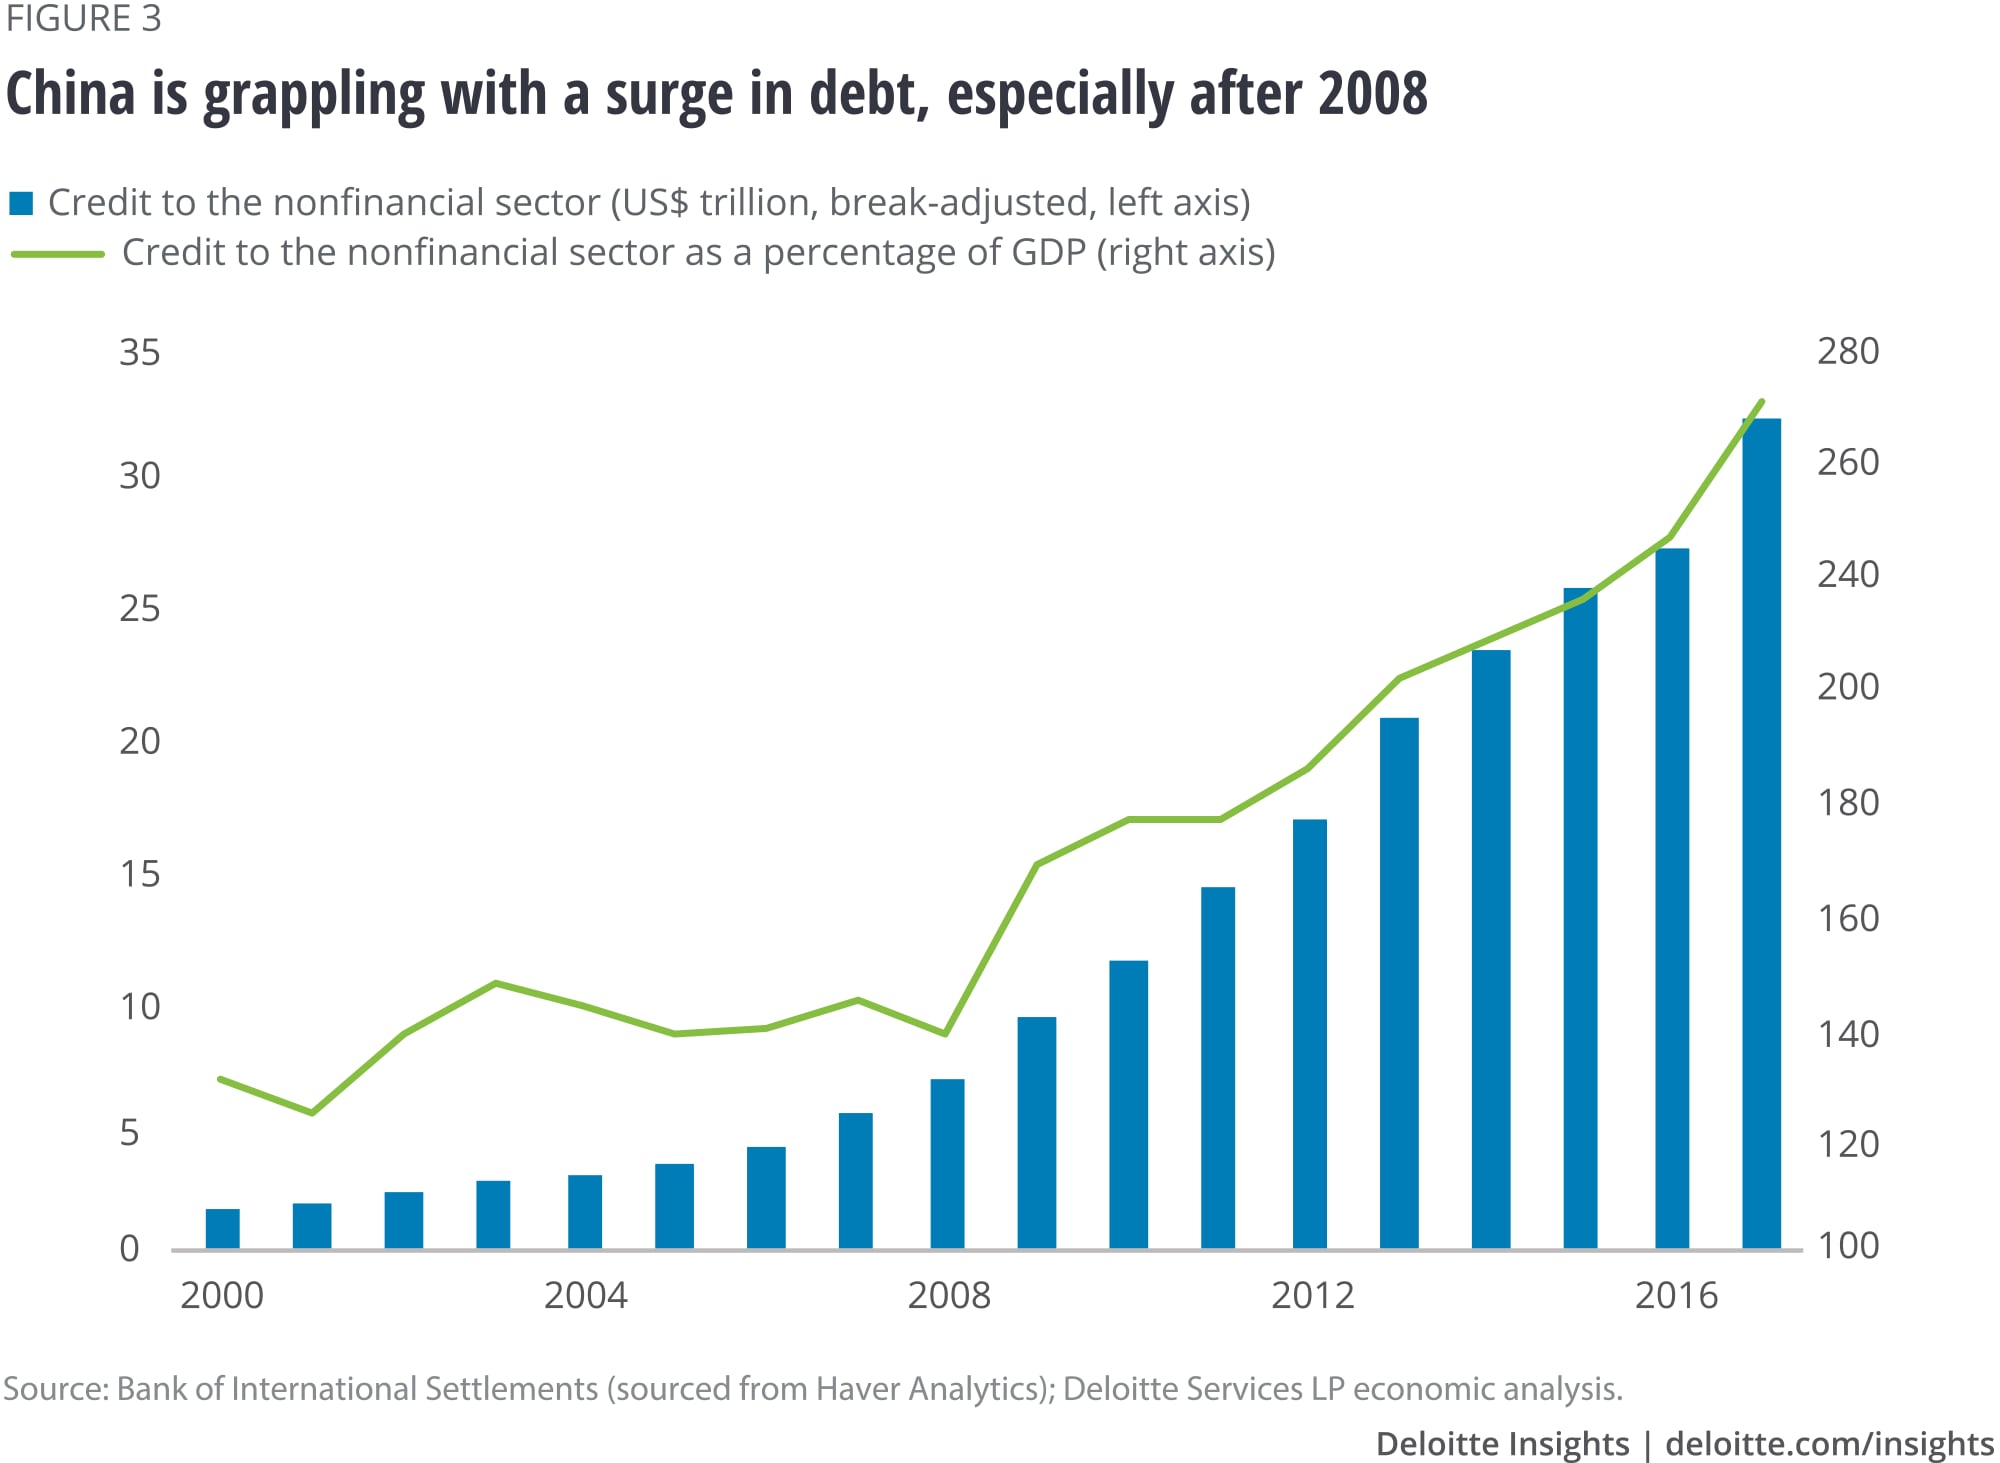 China is grappling with a surge in debt, especially after 2008